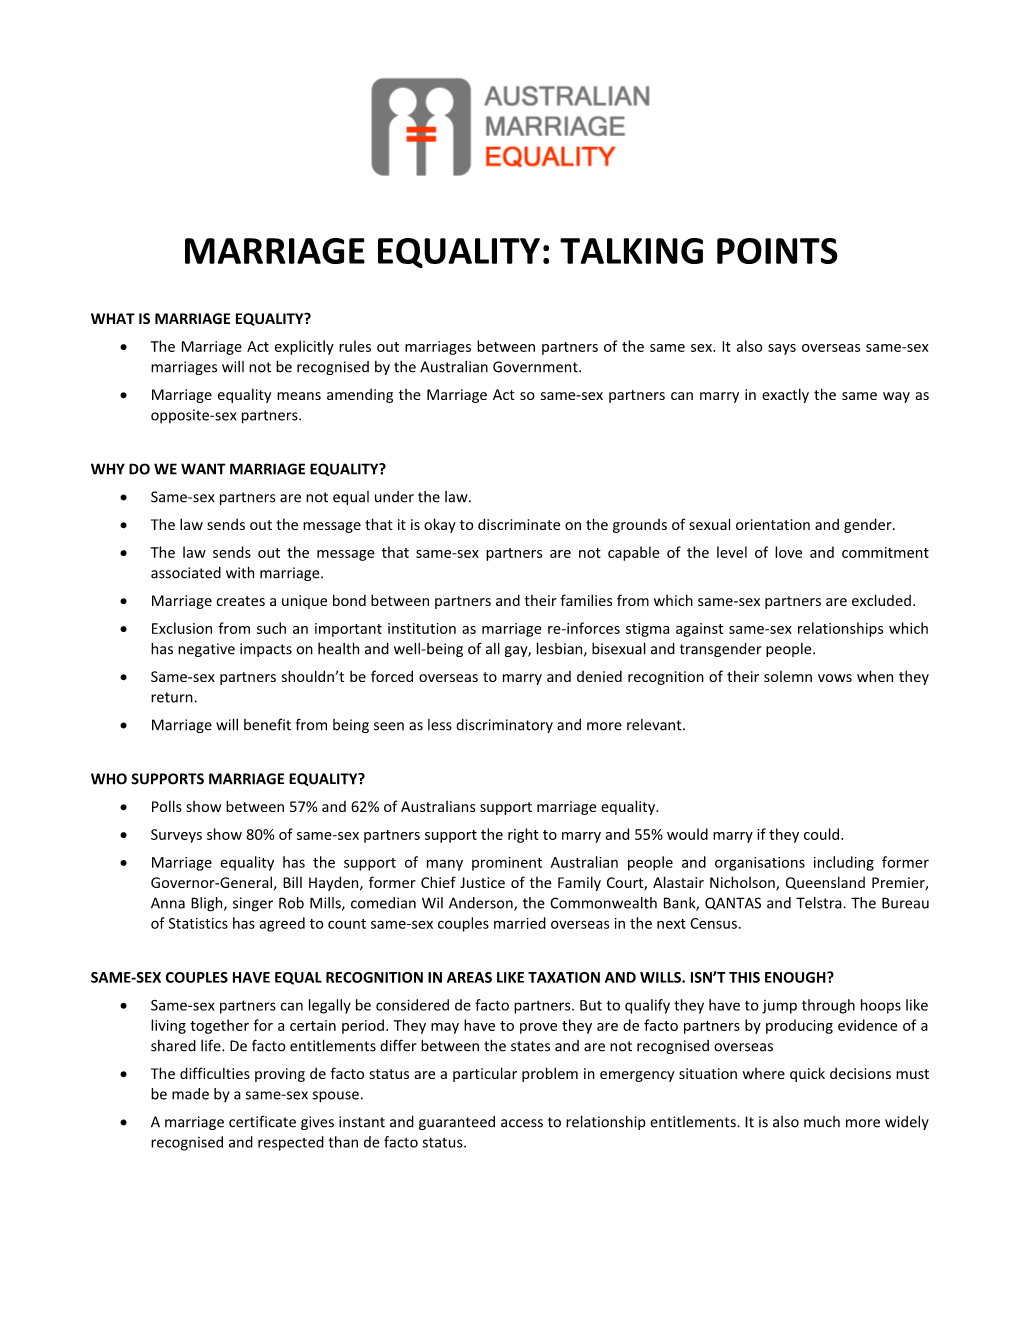 Marriage Equality: Talking Points